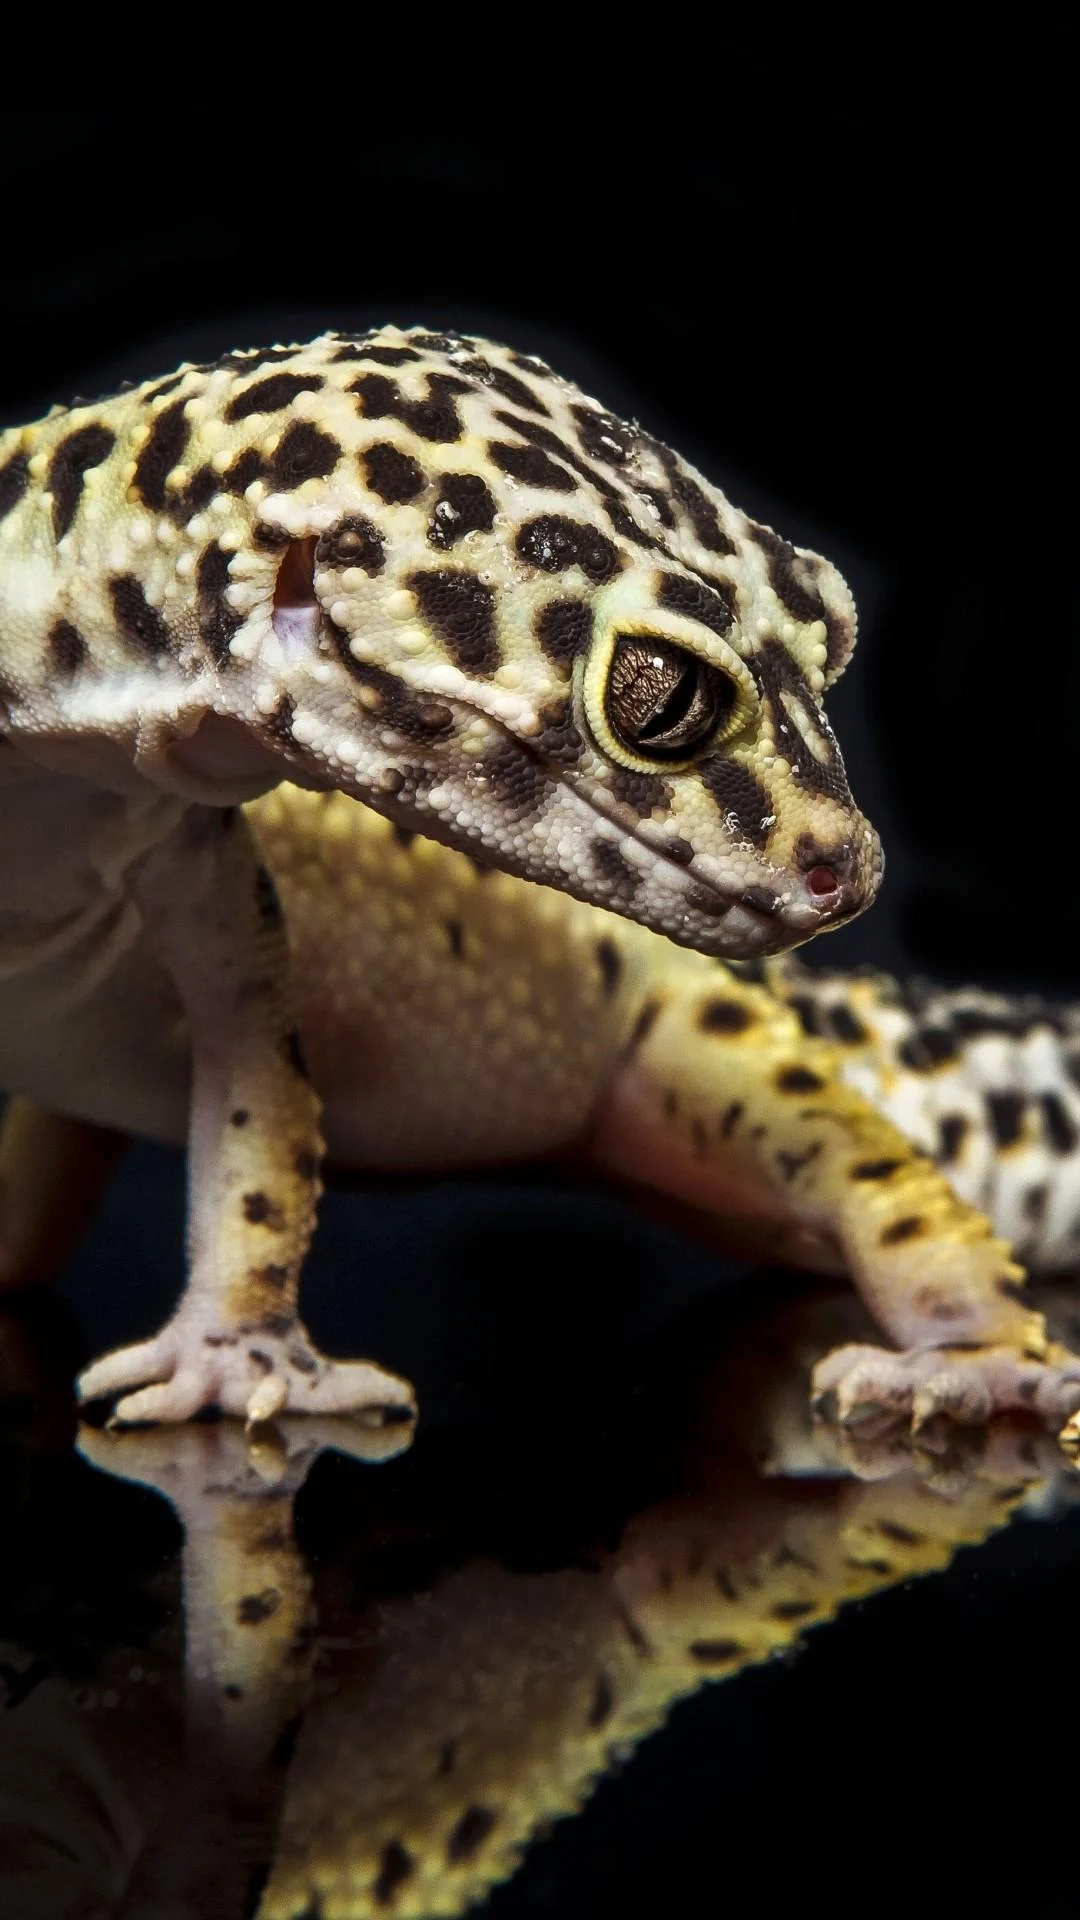 Gecko: Small lizards that derive their name from their spotted coloration. 1080x1920 Full HD Background.